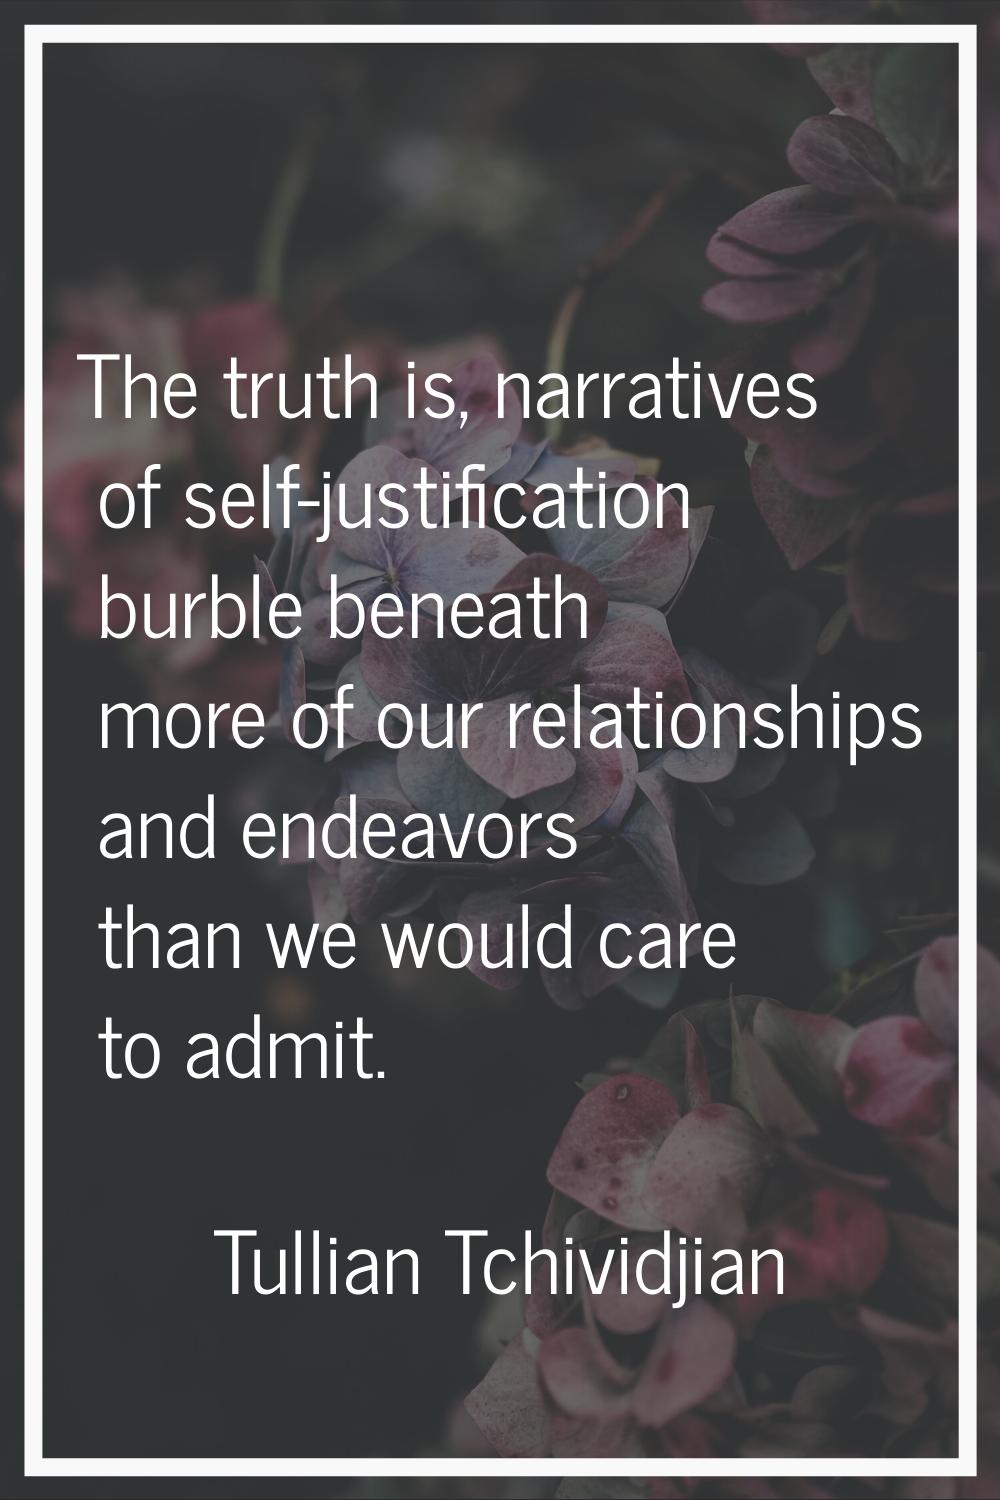 The truth is, narratives of self-justification burble beneath more of our relationships and endeavo